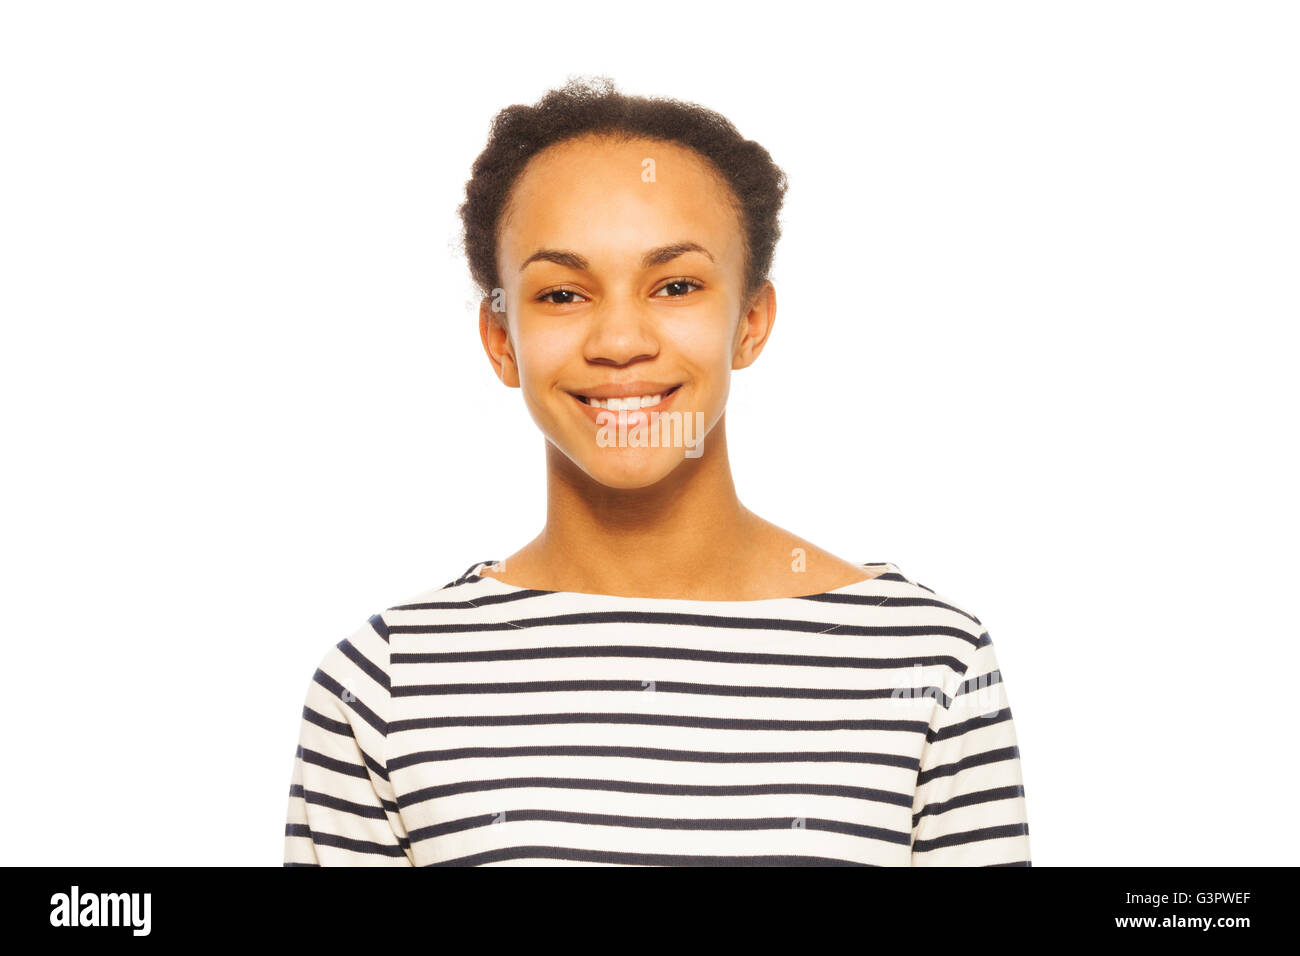 Portrait of pretty smiling African teenager Stock Photo